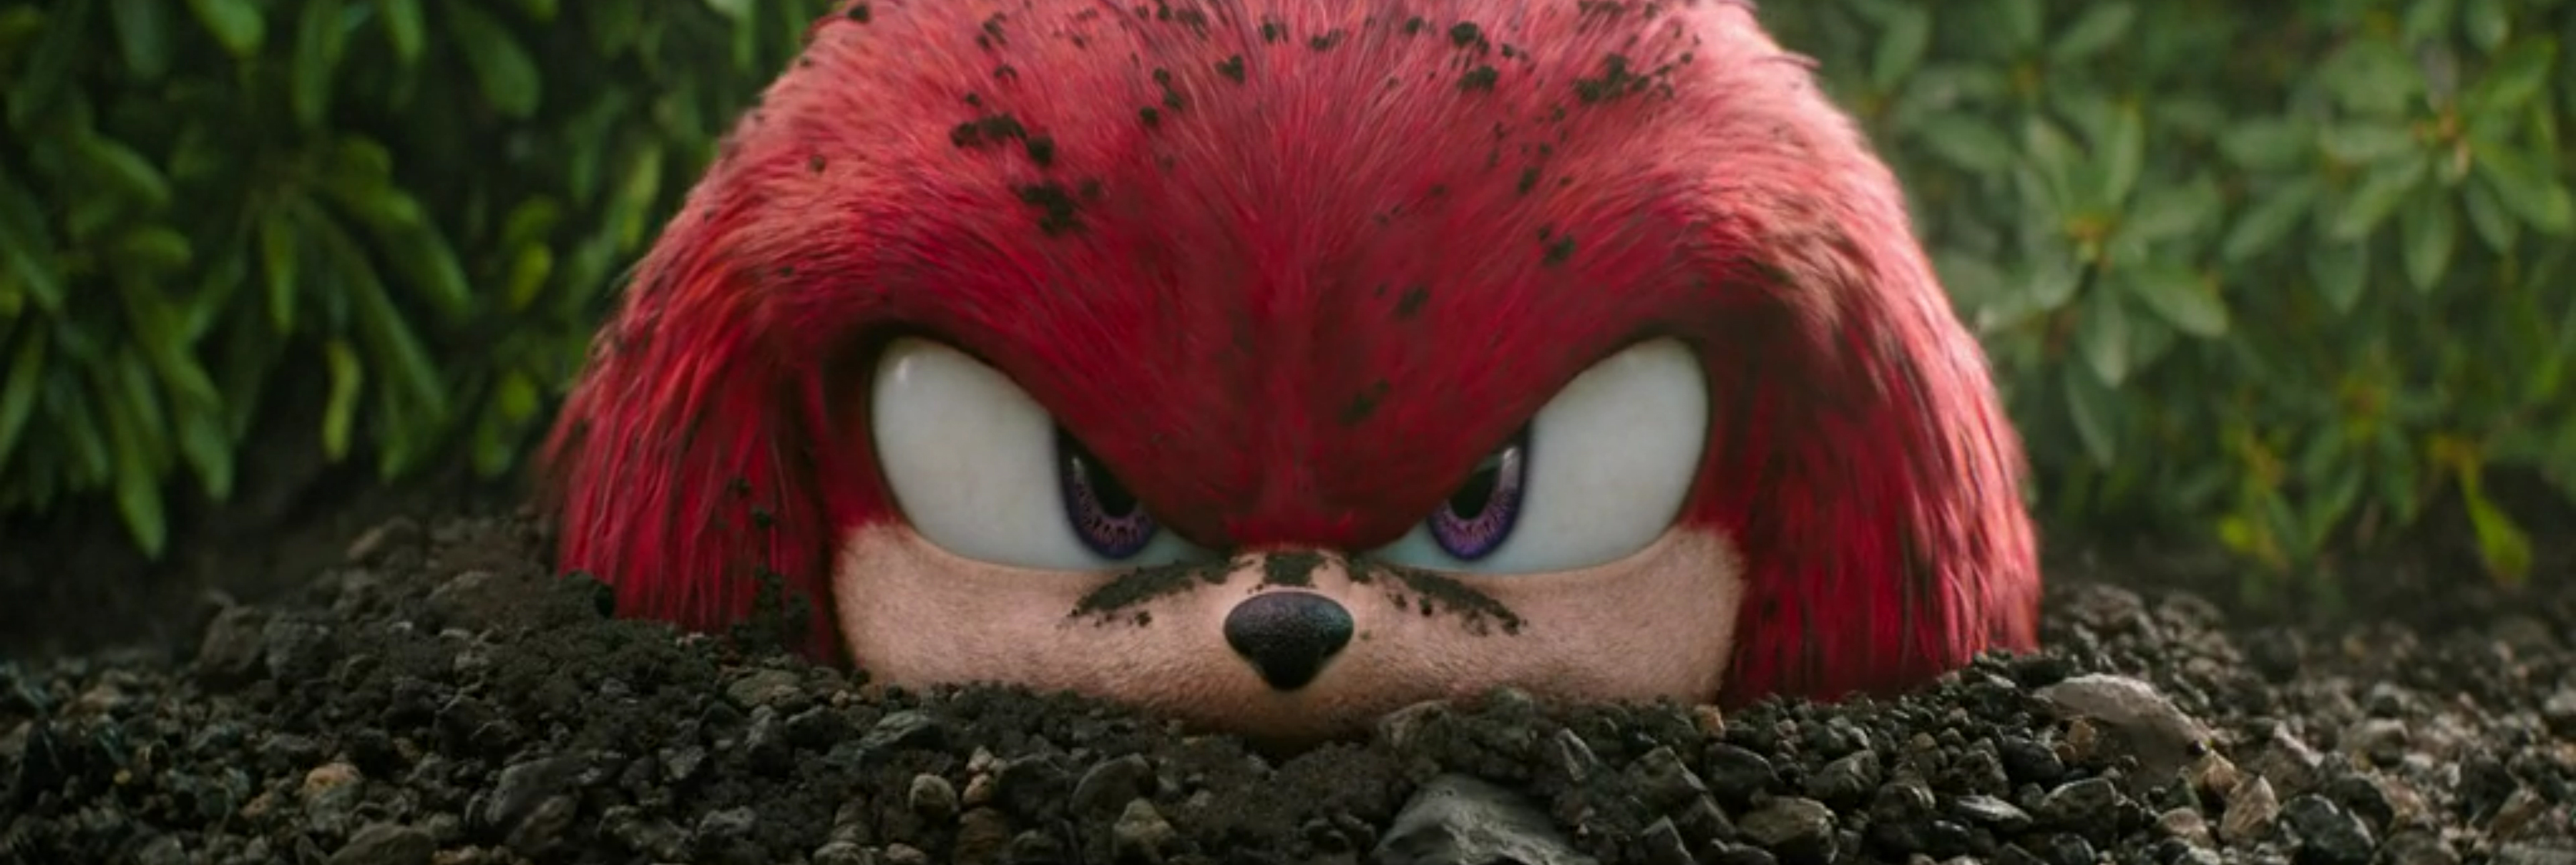 Knuckles burrows up from the ground.